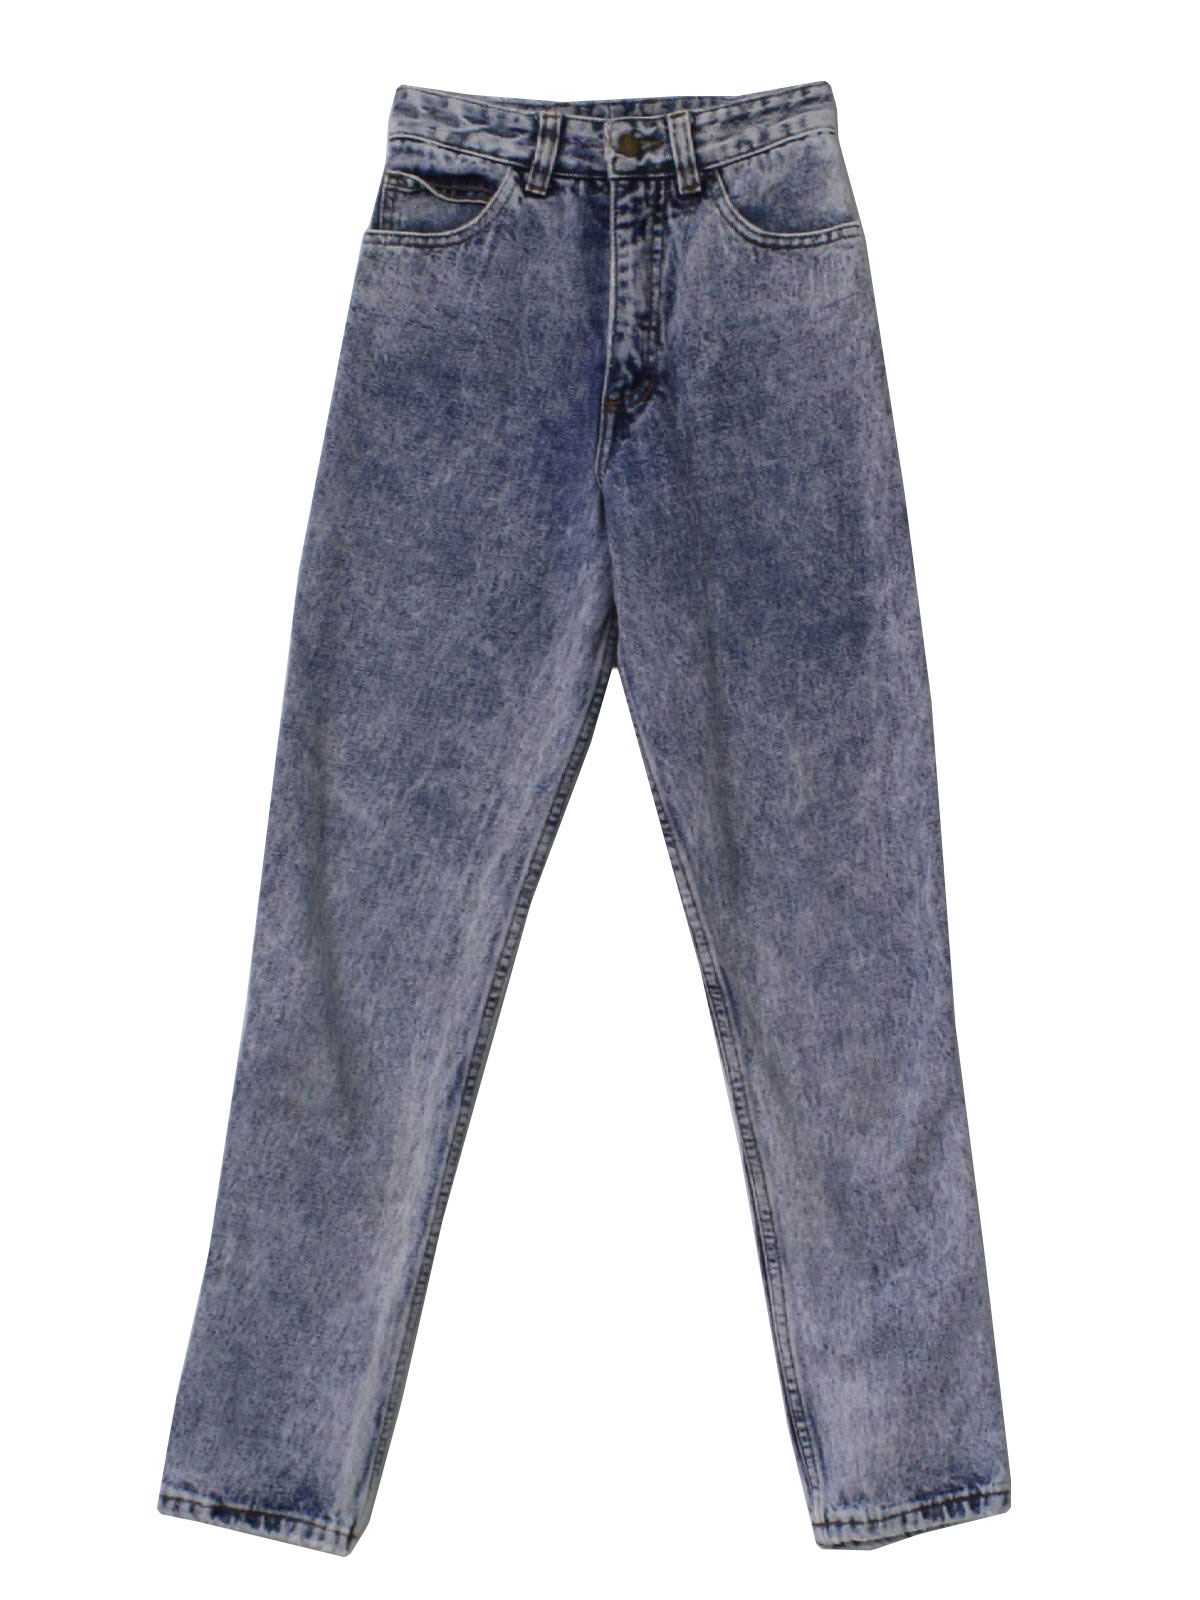 Georges Marciano Eighties Vintage Pants: 80s -Georges Marciano- Womens ...